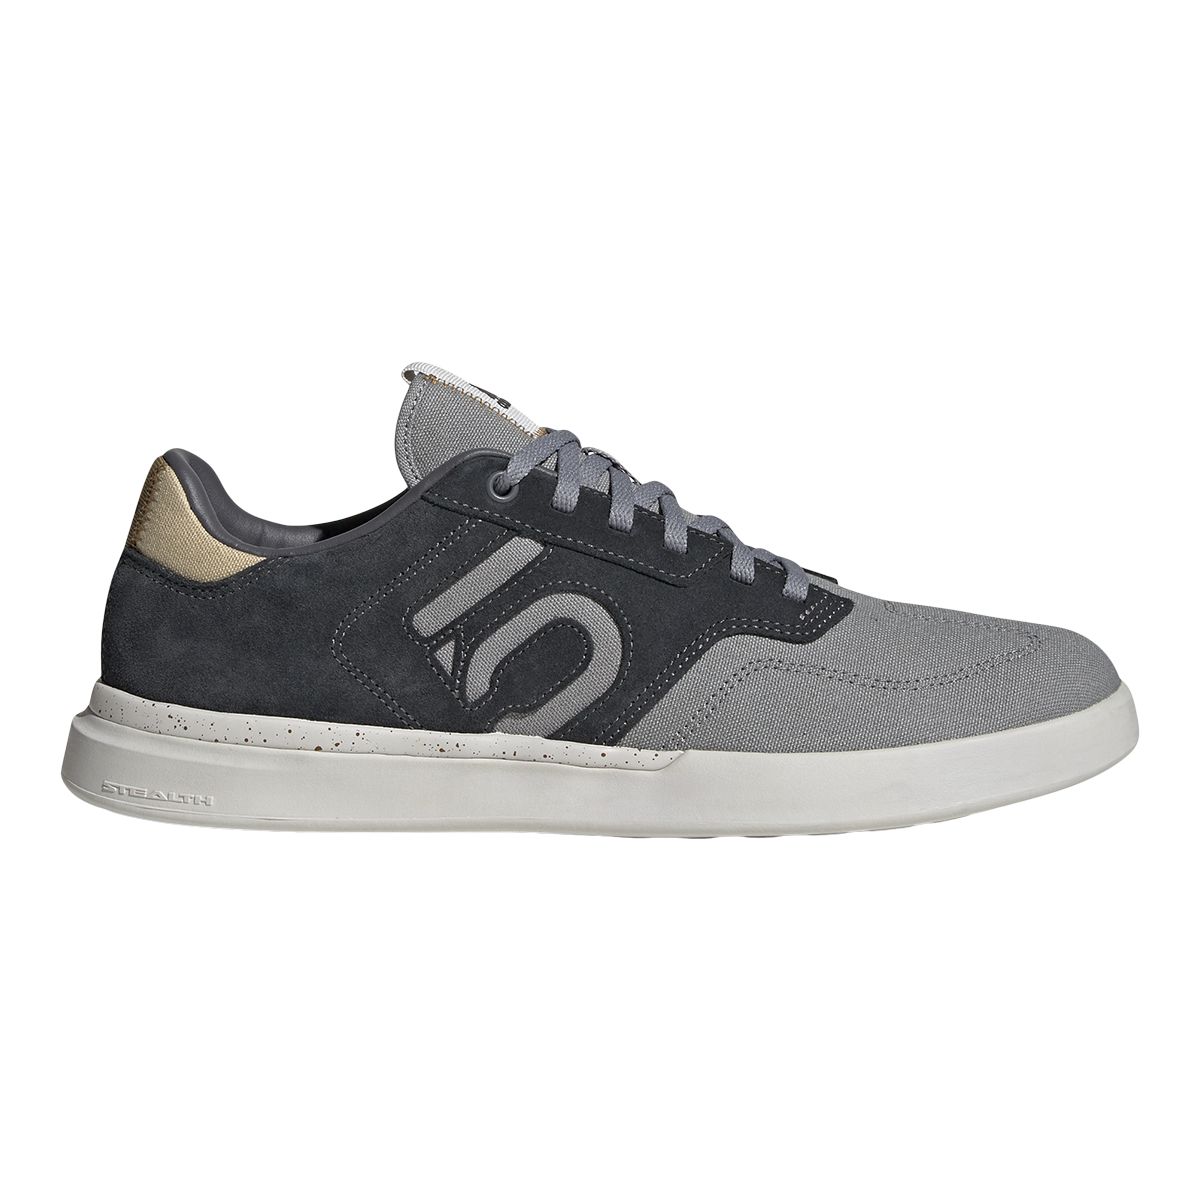 Adidas Mens Five Ten Sleuth Bike Shoes Southcentre Mall